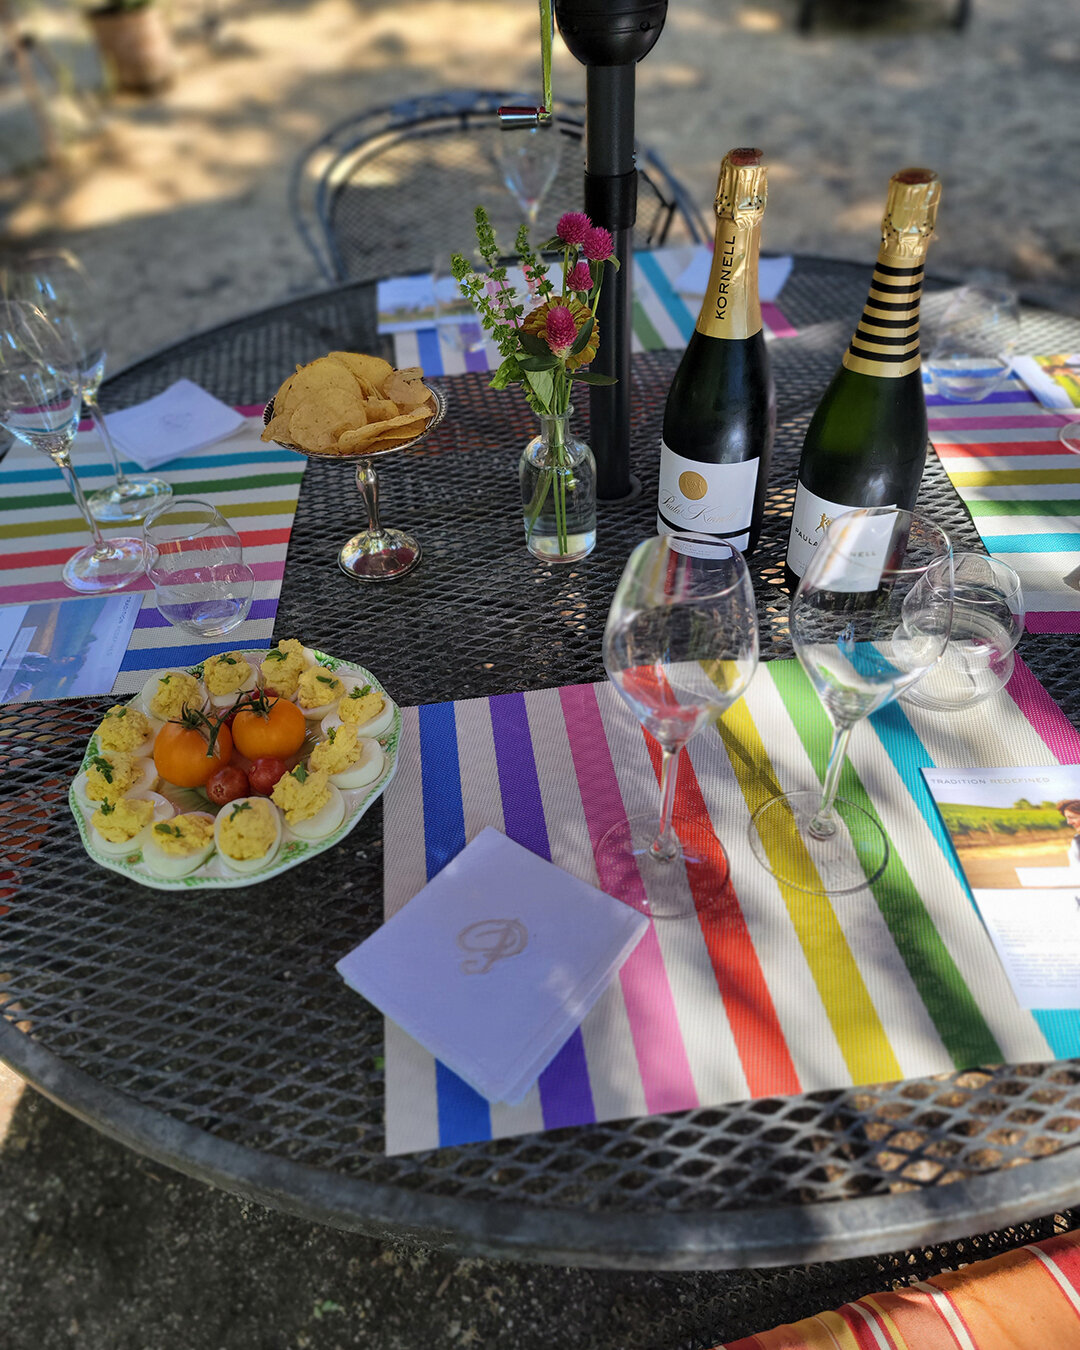 Join me and the creatures of Chateau Drool for a delightful and educational backyard tasting of my bubbles, a chance to taste both my California Brut and Napa Valley Blanc de Noirs under the redwoods. 

#winetasting #wine #winelover #winetime #winelo